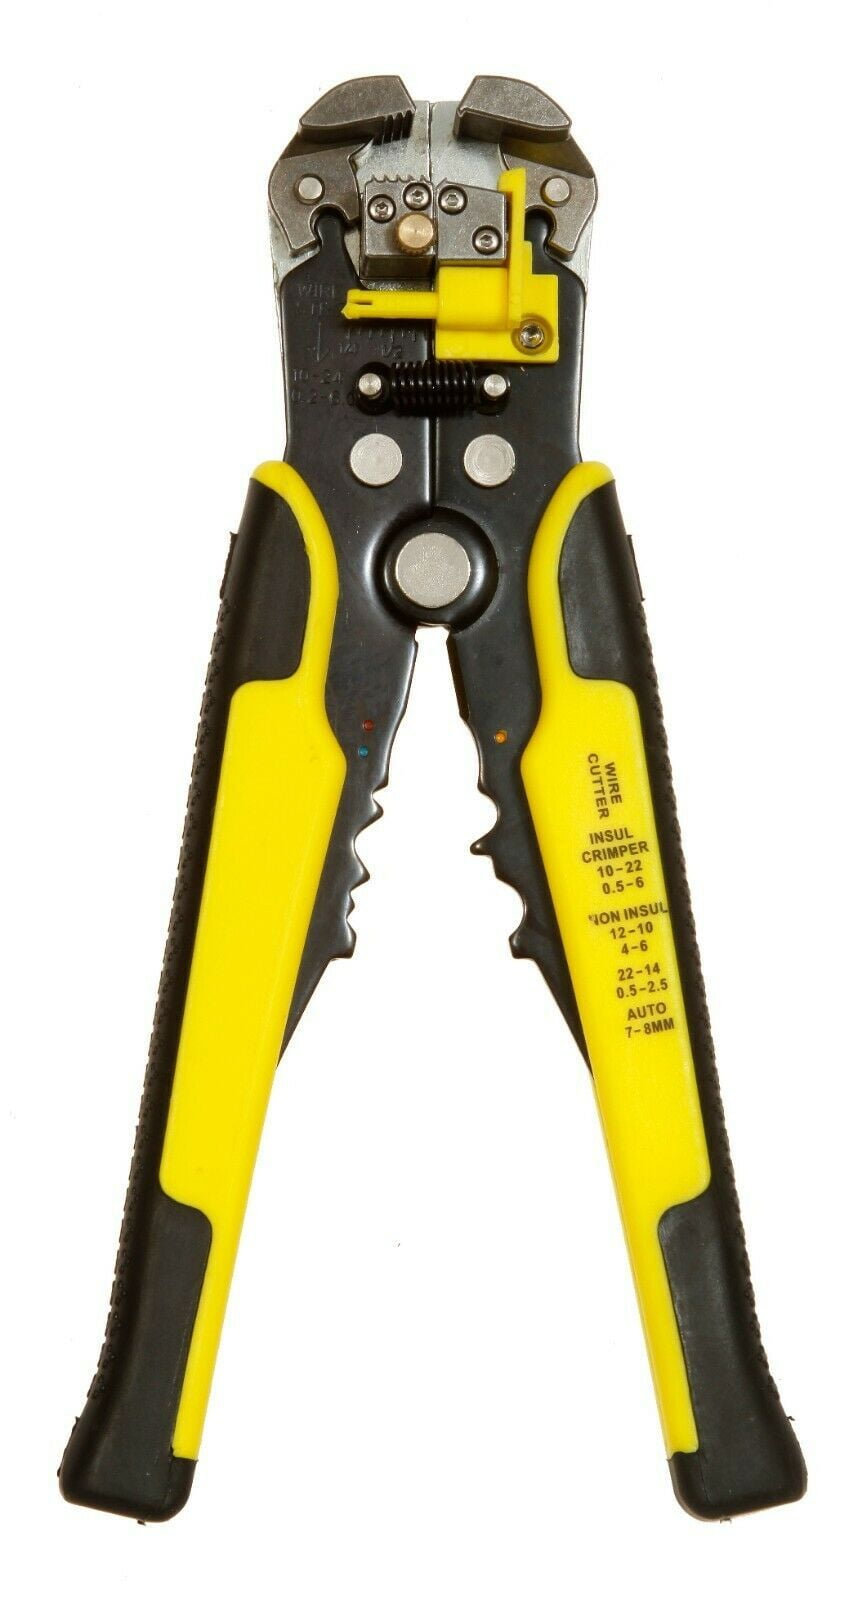 Self Adjusting Insulation Wire stripper/cutter/crimper Cable Stripping Tools 8" 